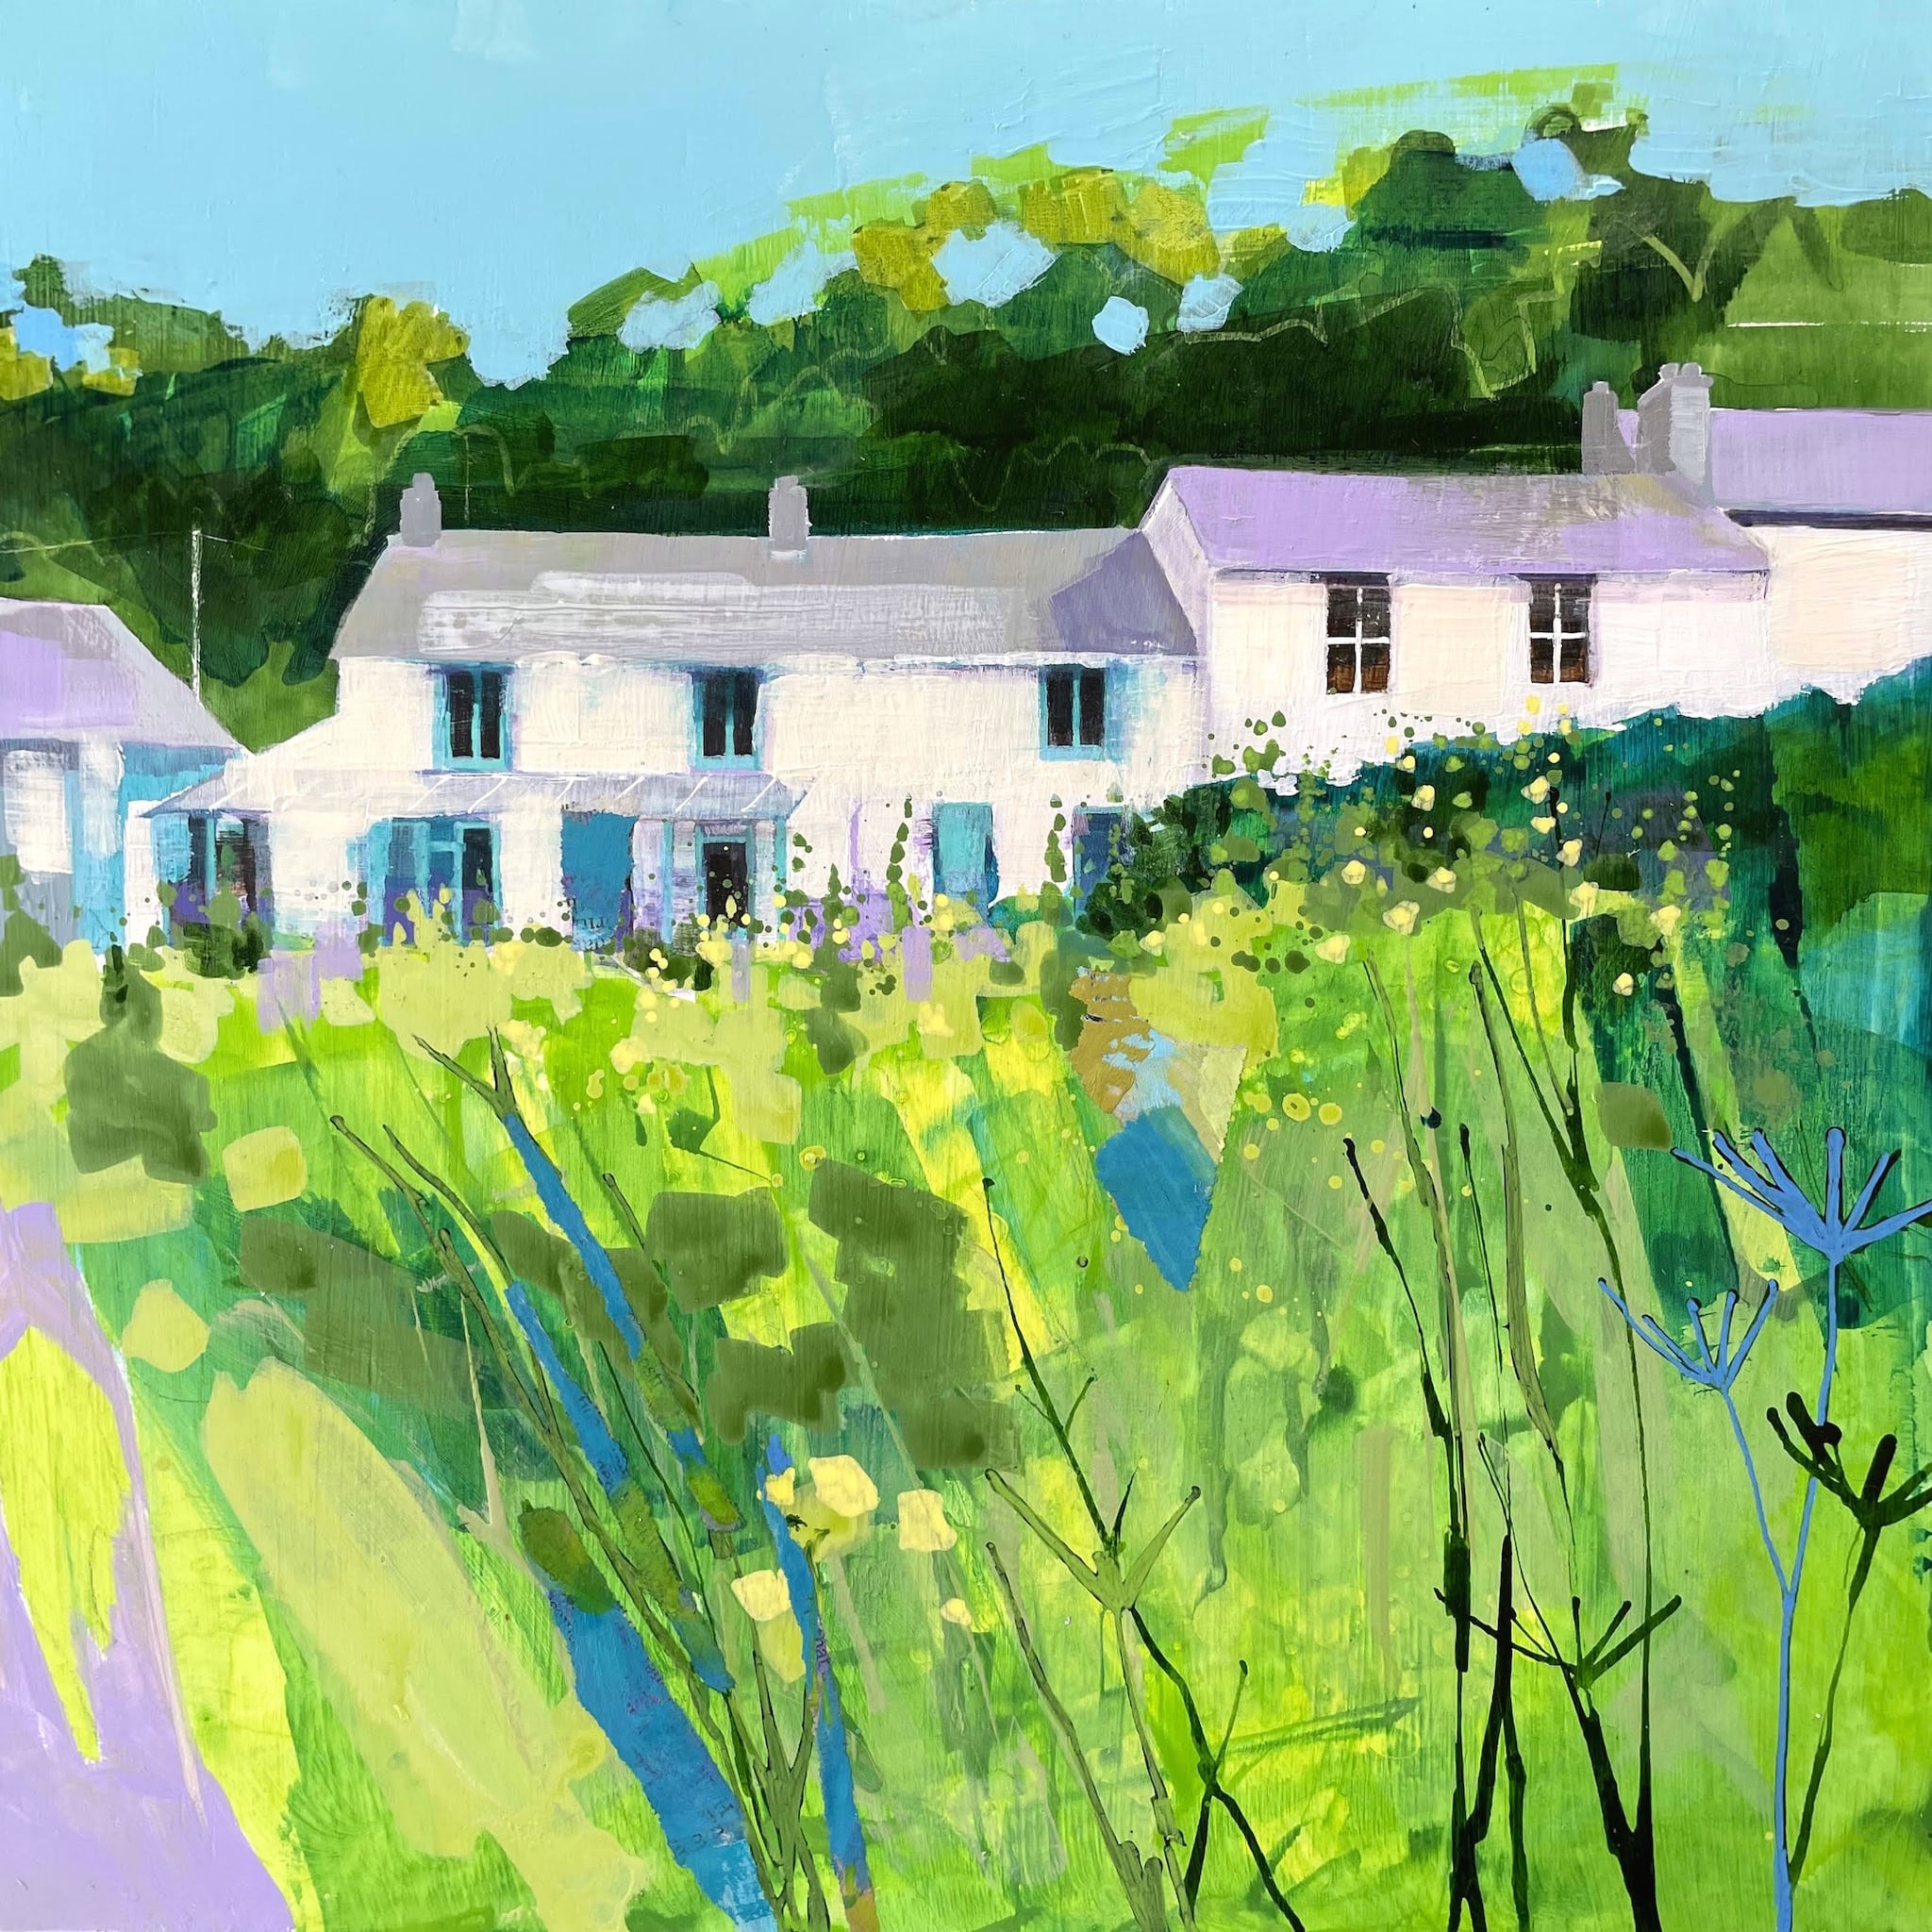 Painting of cornish cottages by artist Lucy Davies